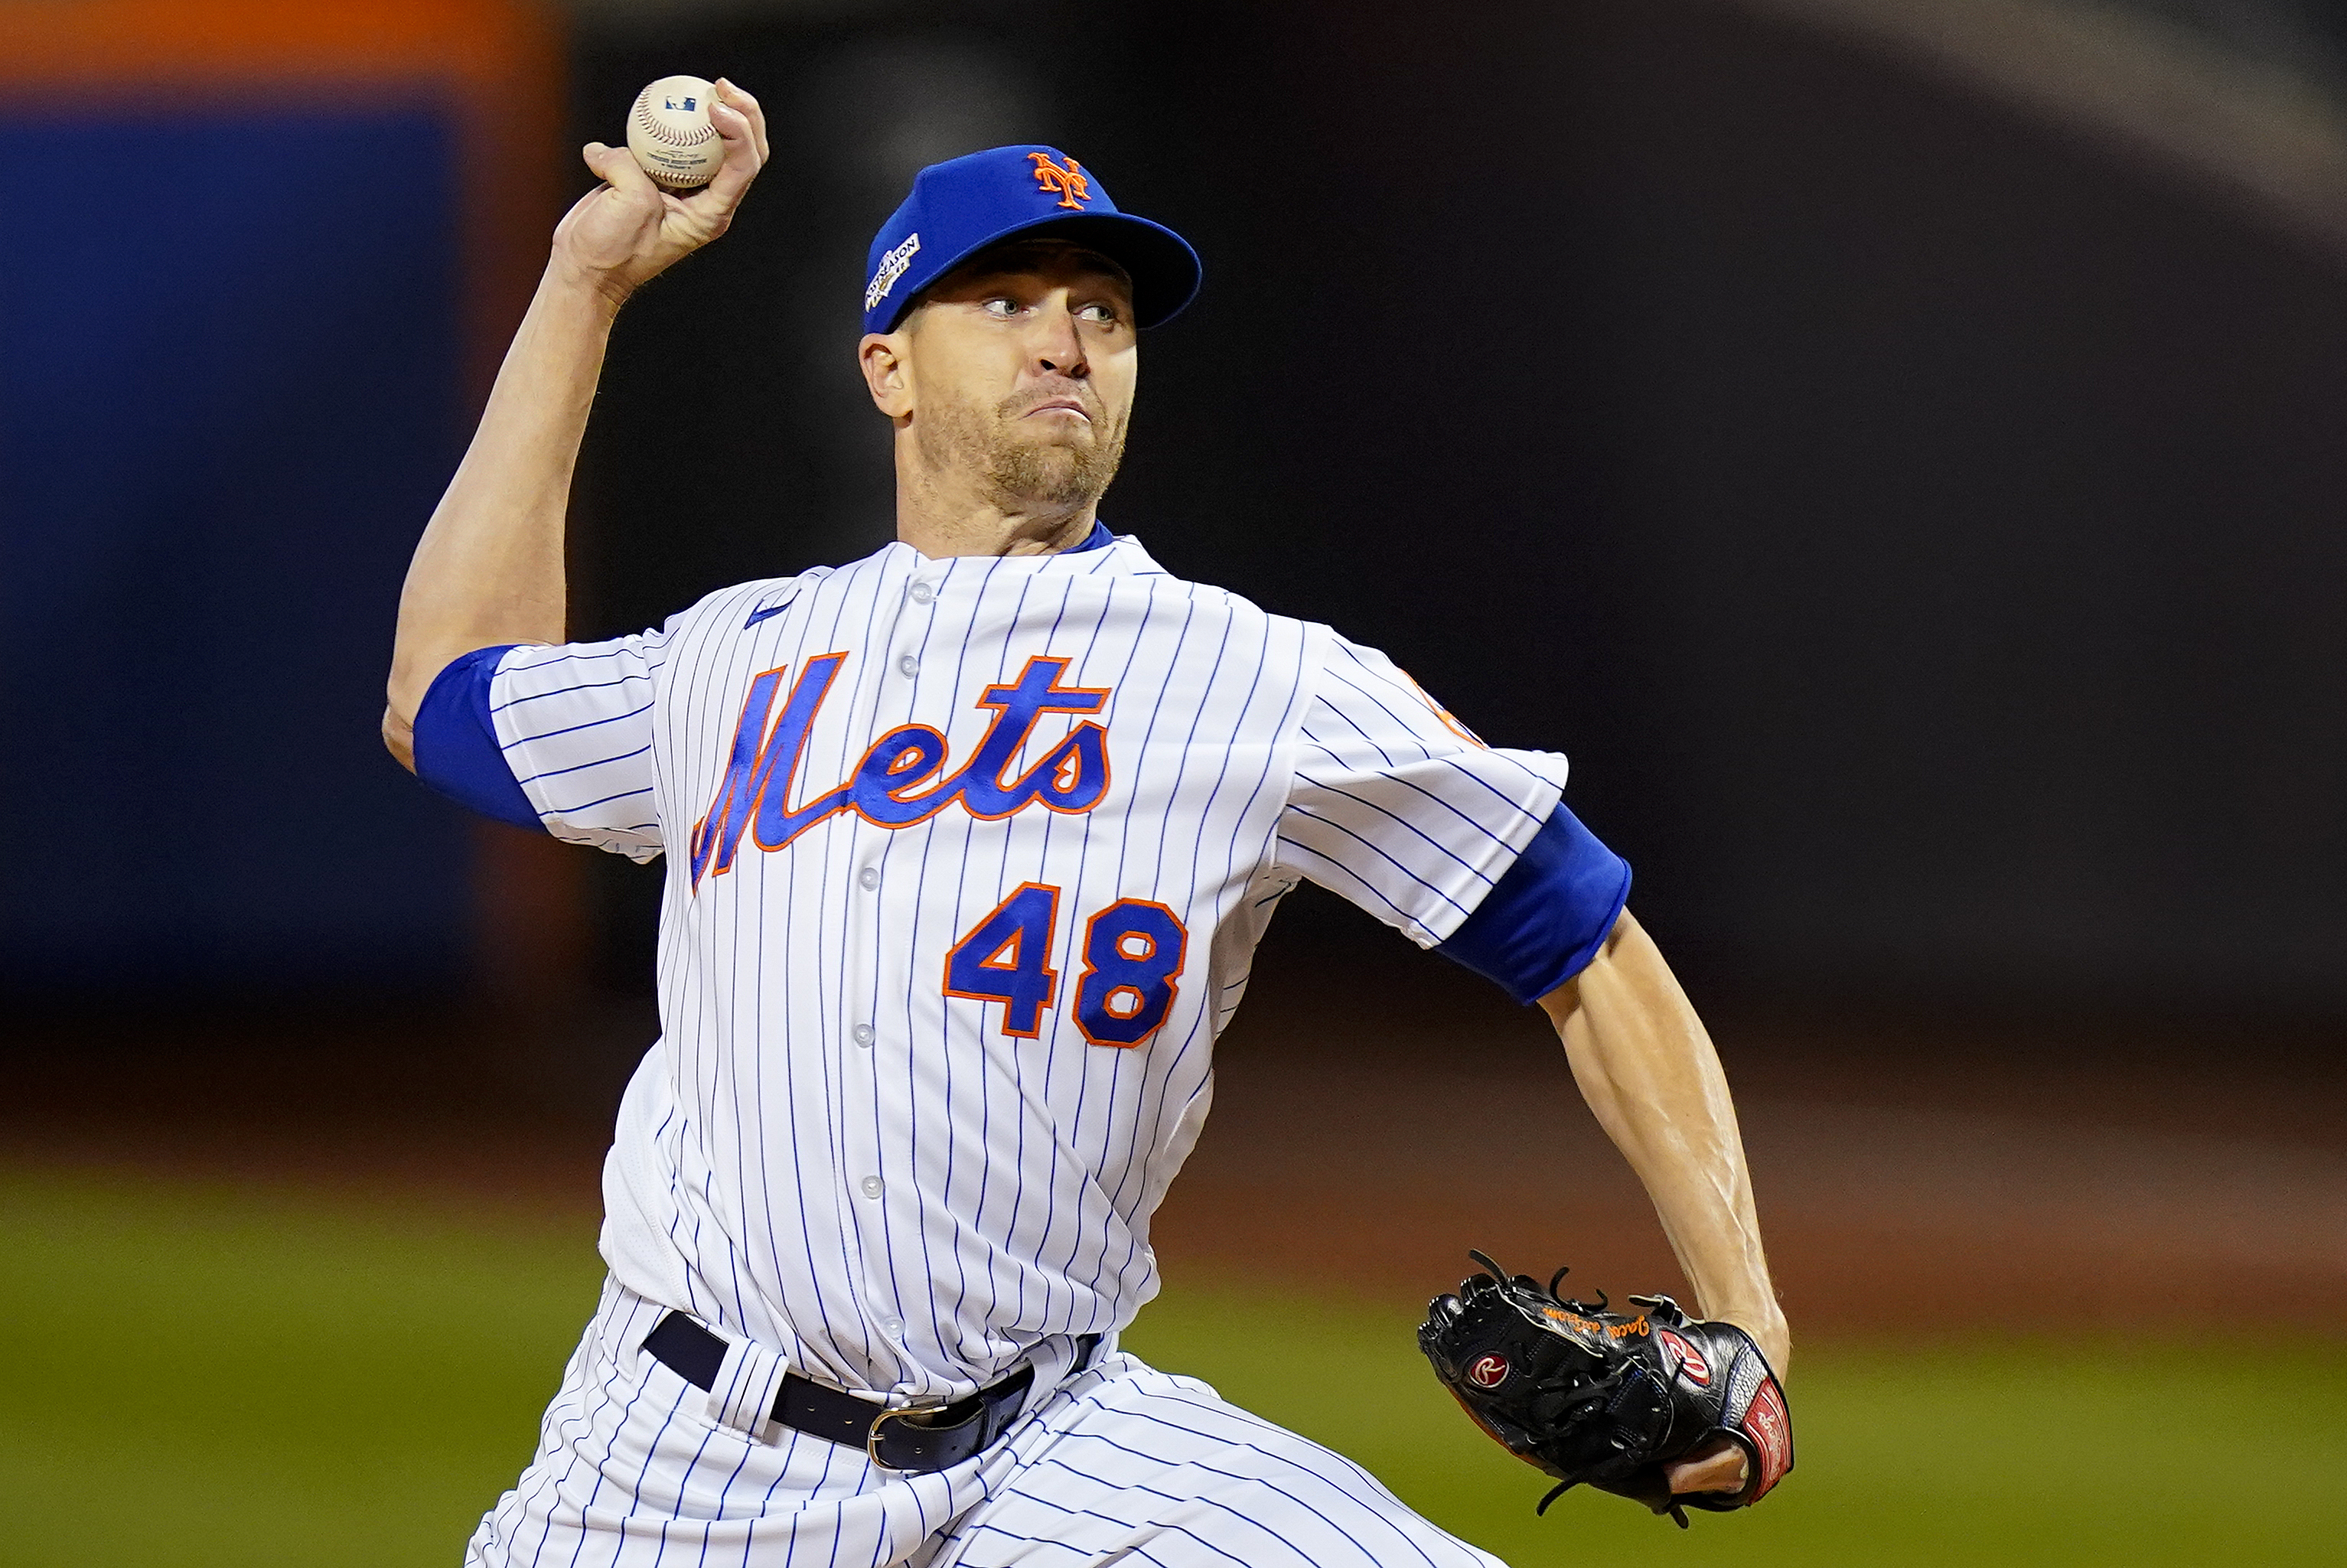 Jacob deGrom Signs $185 Million Deal With Texas Rangers - The New